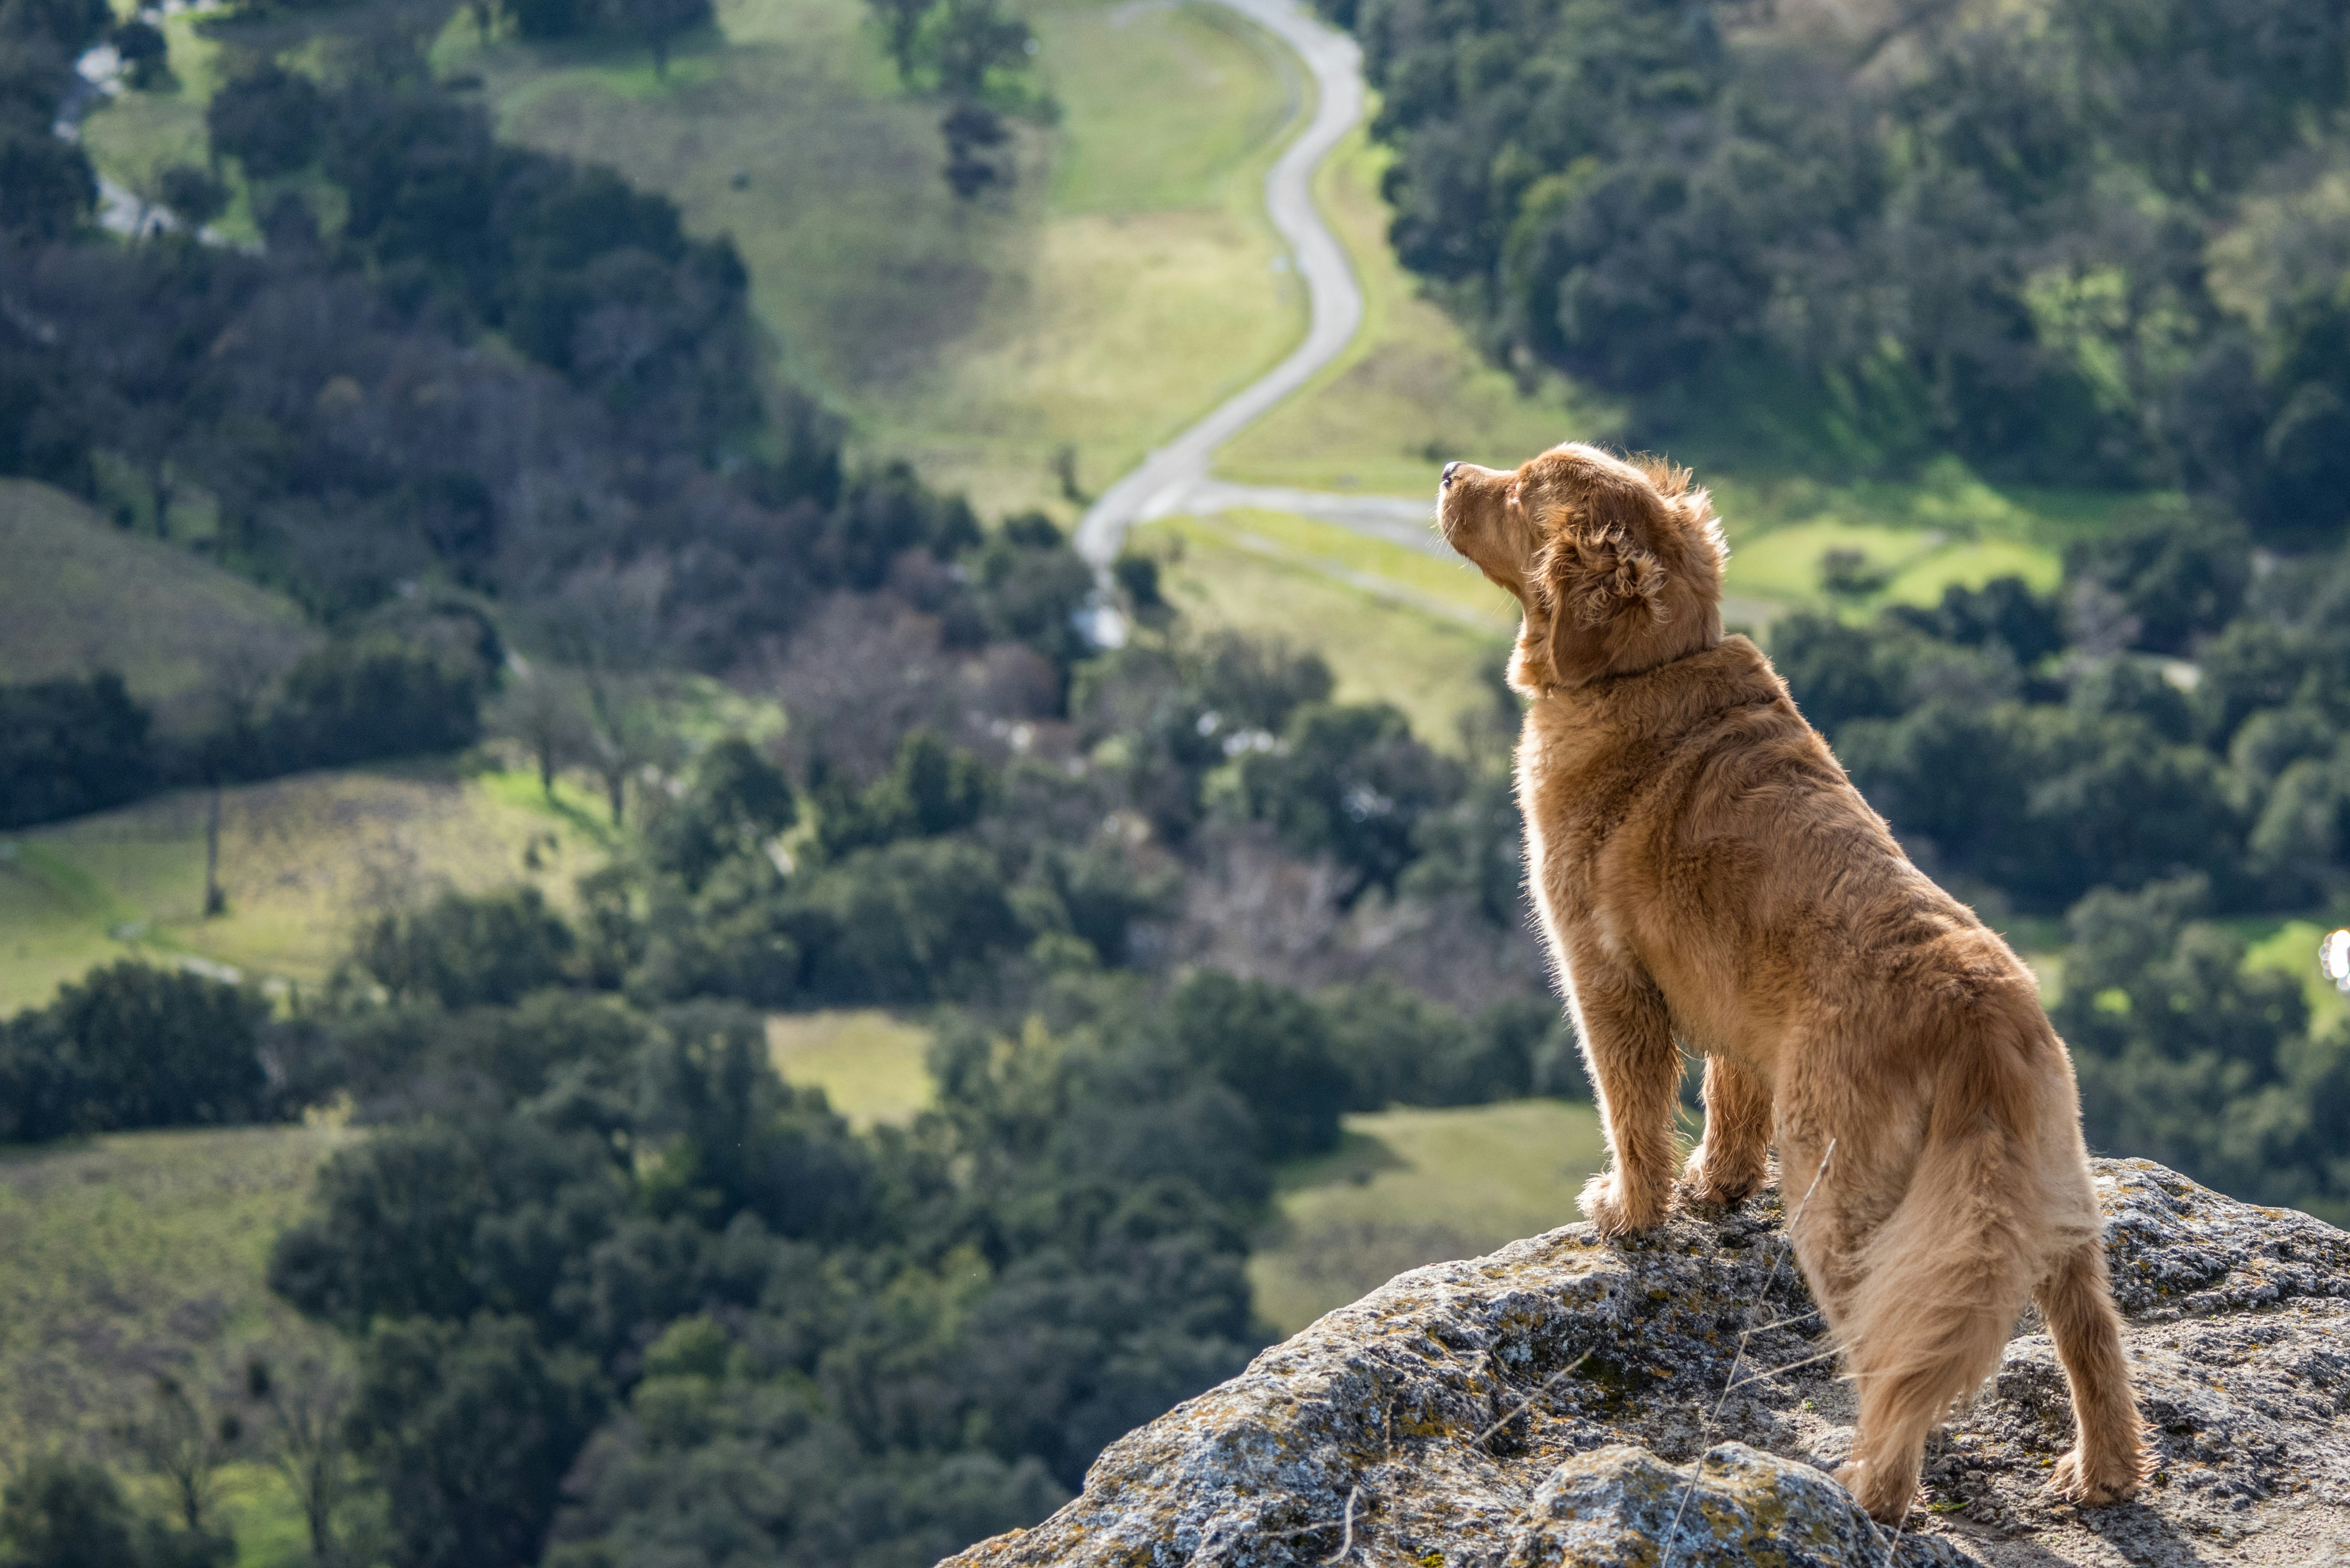 great photo recipe,how to photograph out hiking with my dog in the sunol regional wilderness in california.  we made a big climb to the top of the cliffs.  once there, she seemed so pleased to take it all in.; short-coated brown dog on gray cliff